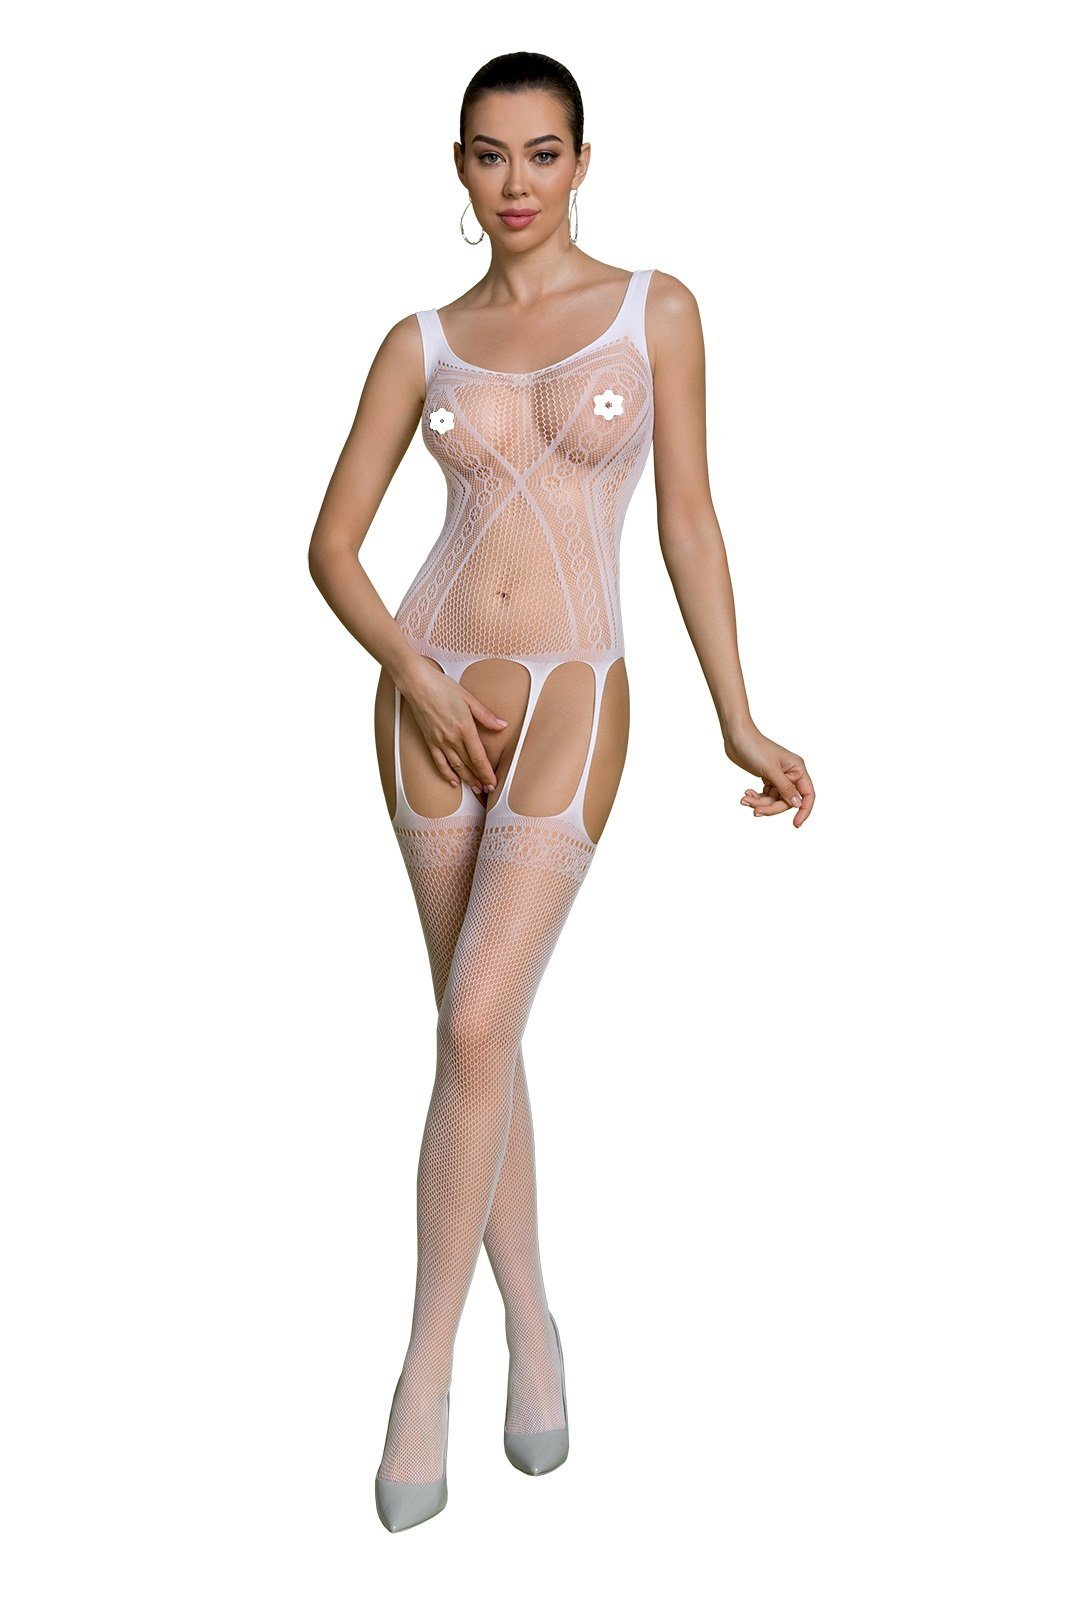 Passion Eco Collection Passion Bodystocking Bodystocking weiß ouvert Catsuit transparent Netz 20 DEN (1 St)